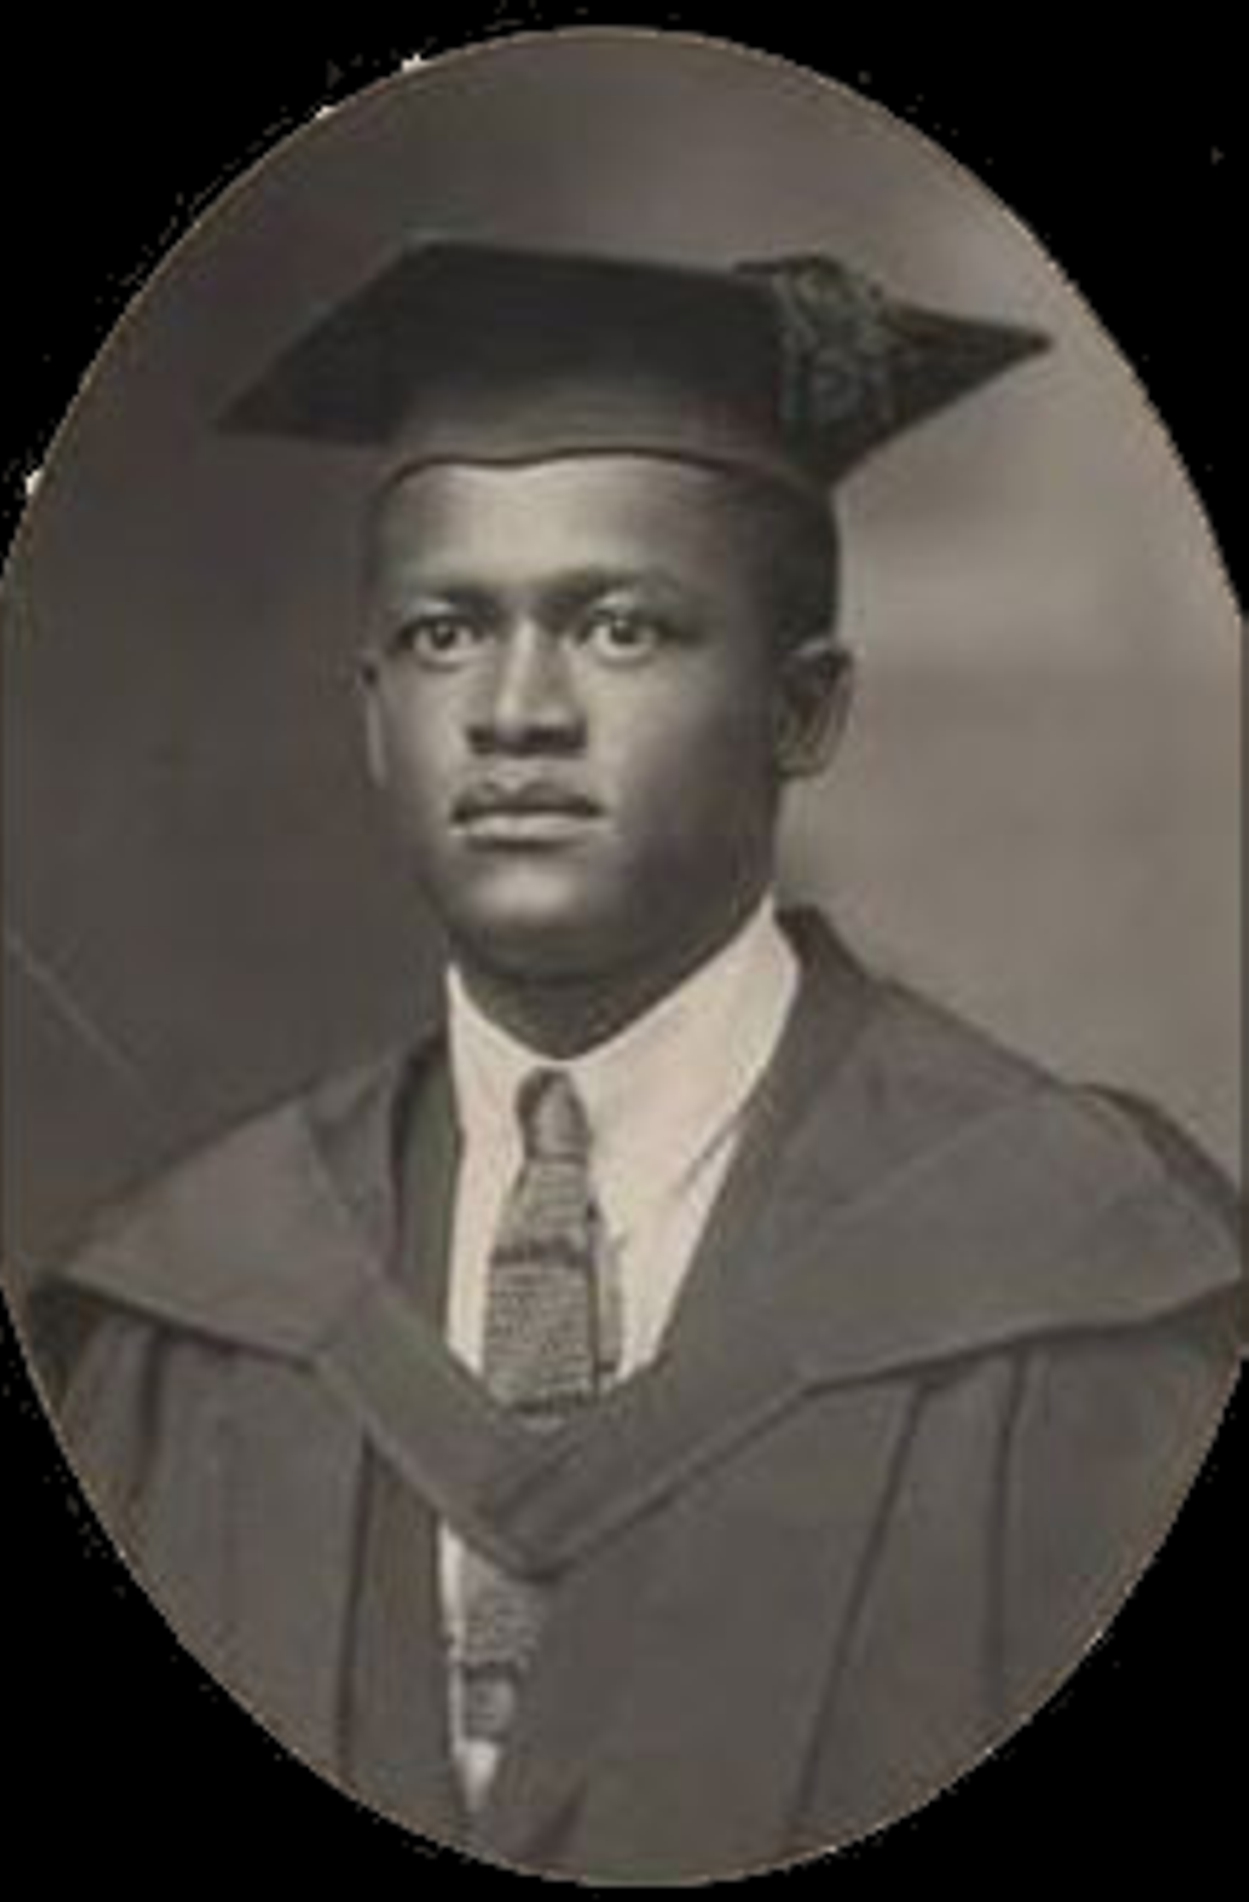 In 1923 Zachariah Keodirelang Matthews became the first black graduate to obtain a Bachelor of Arts degree from a South African university, Fort Hare. He was a friend of the Jabavu family and lived with them for some time during his studies.